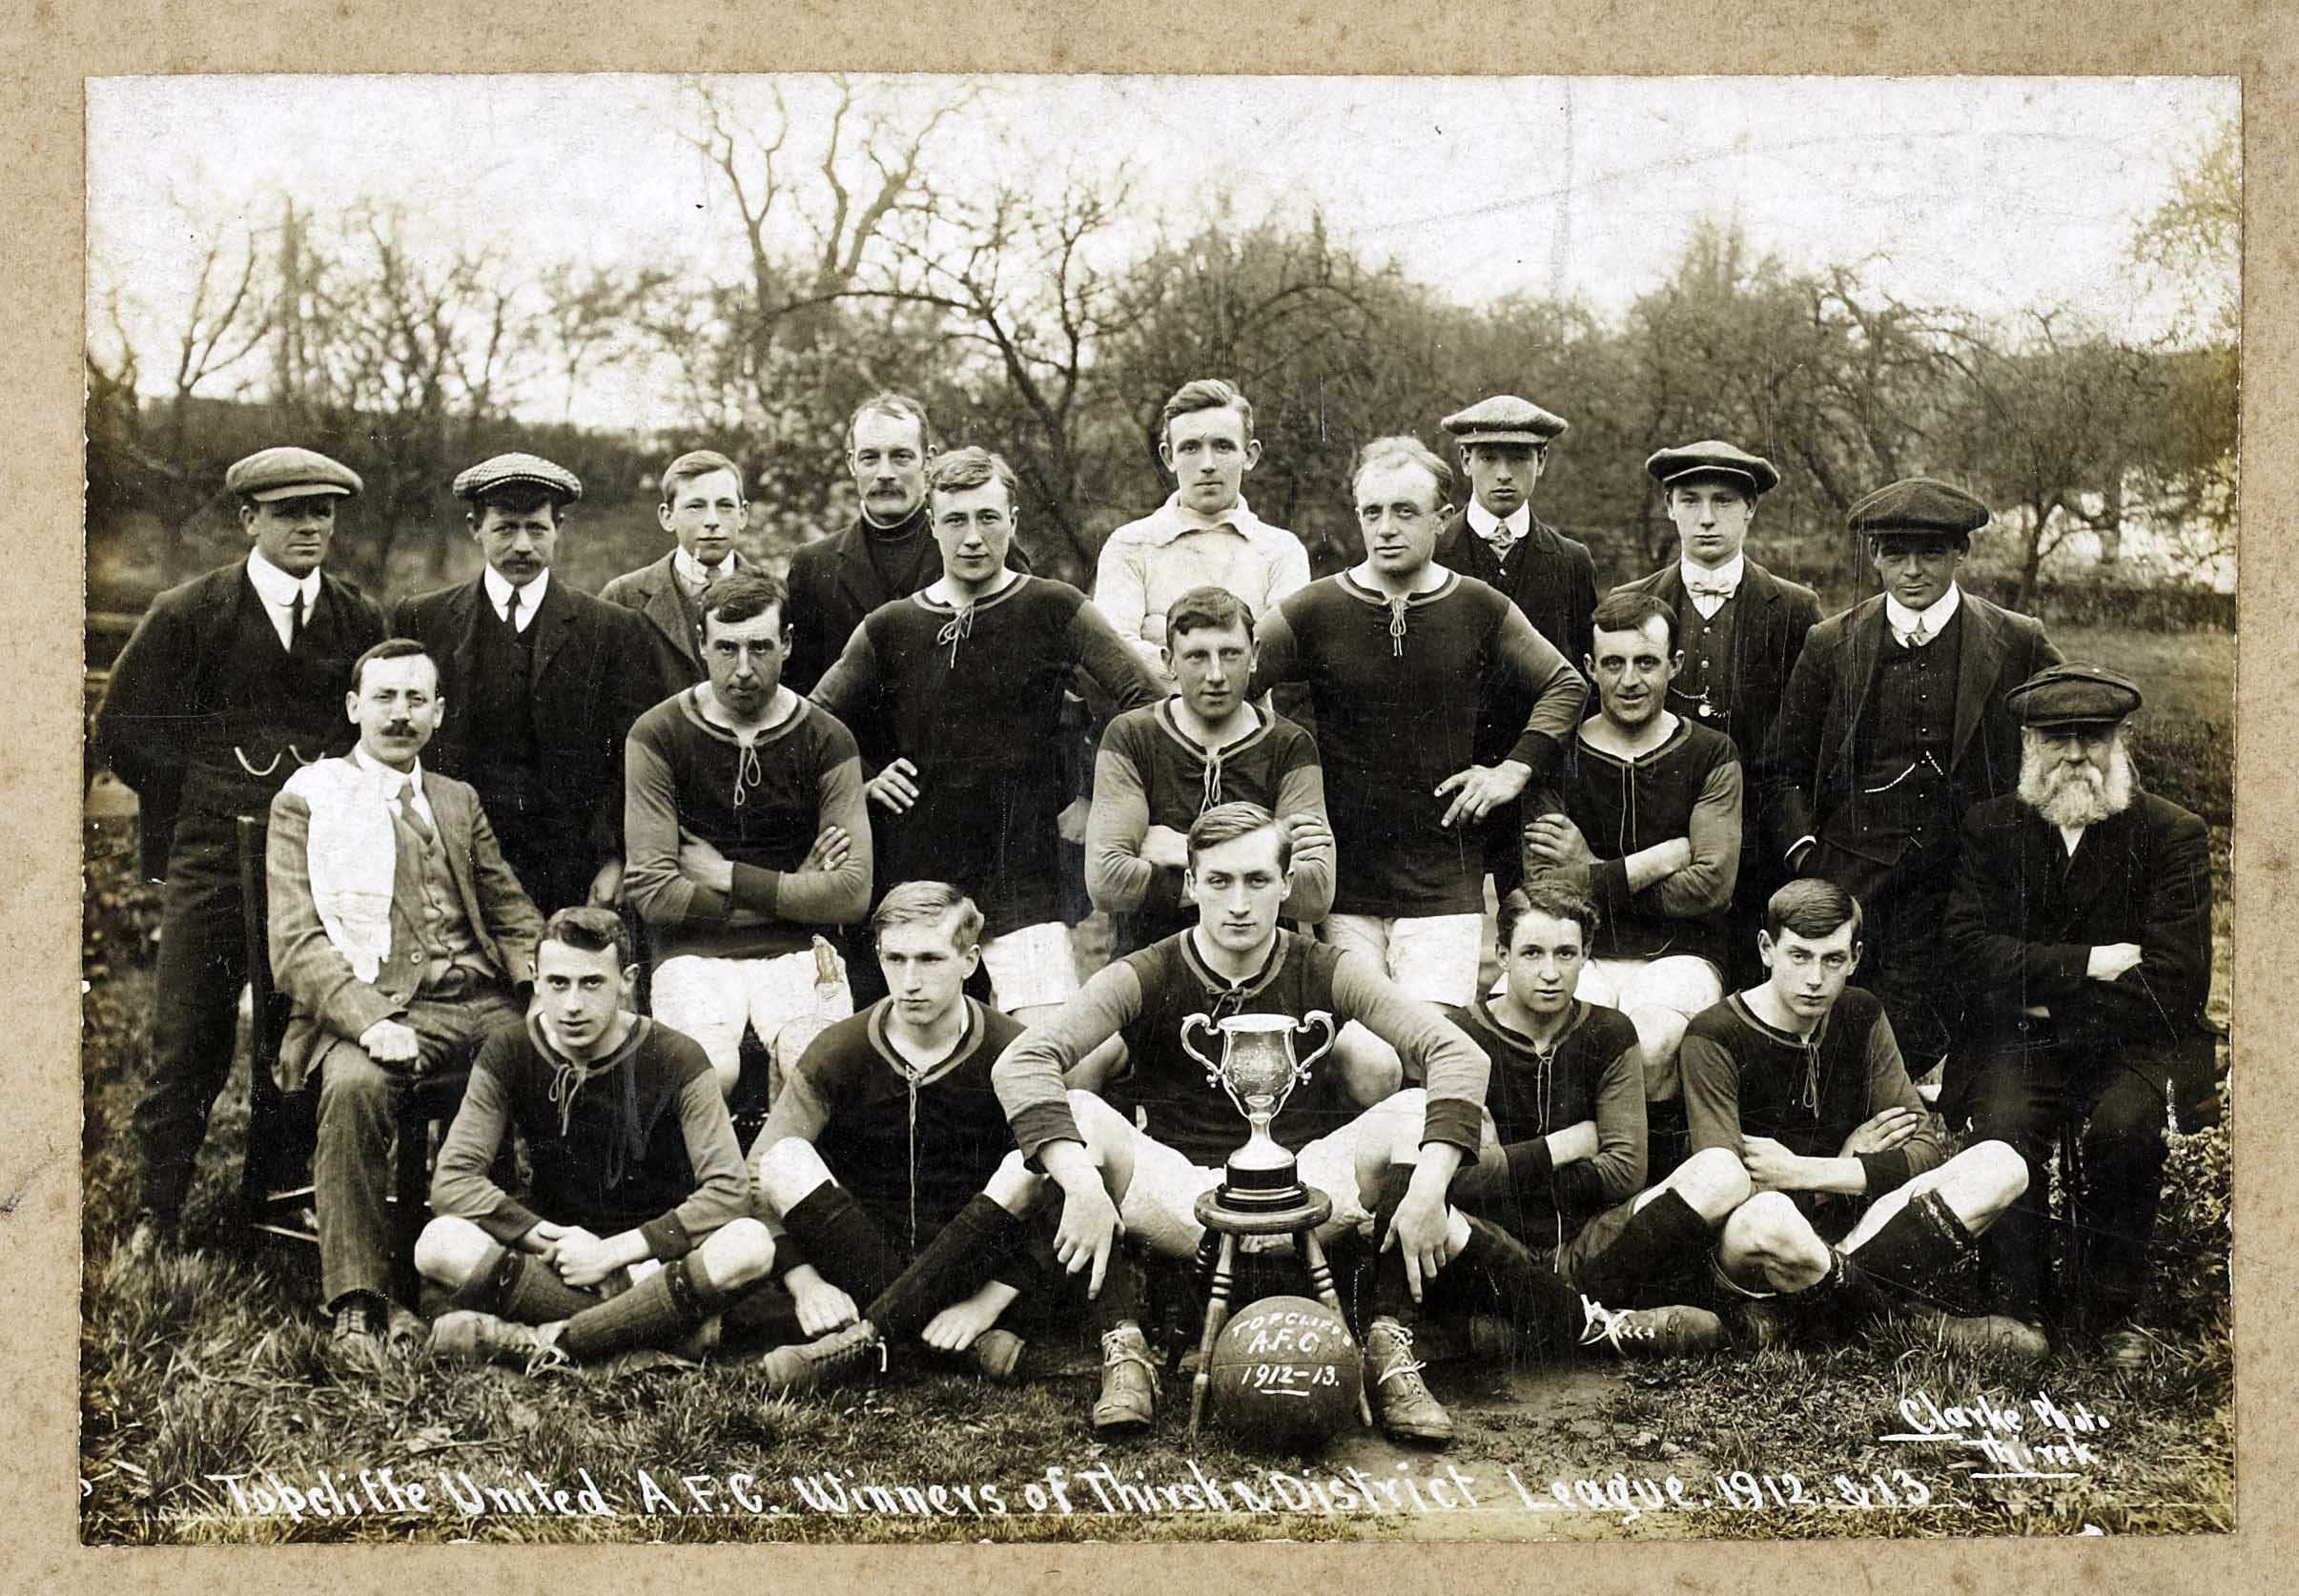 Topcliffe United AFC, the winners of the Thirsk and District League 1912-1913, from a collection of Topcliffe village records.